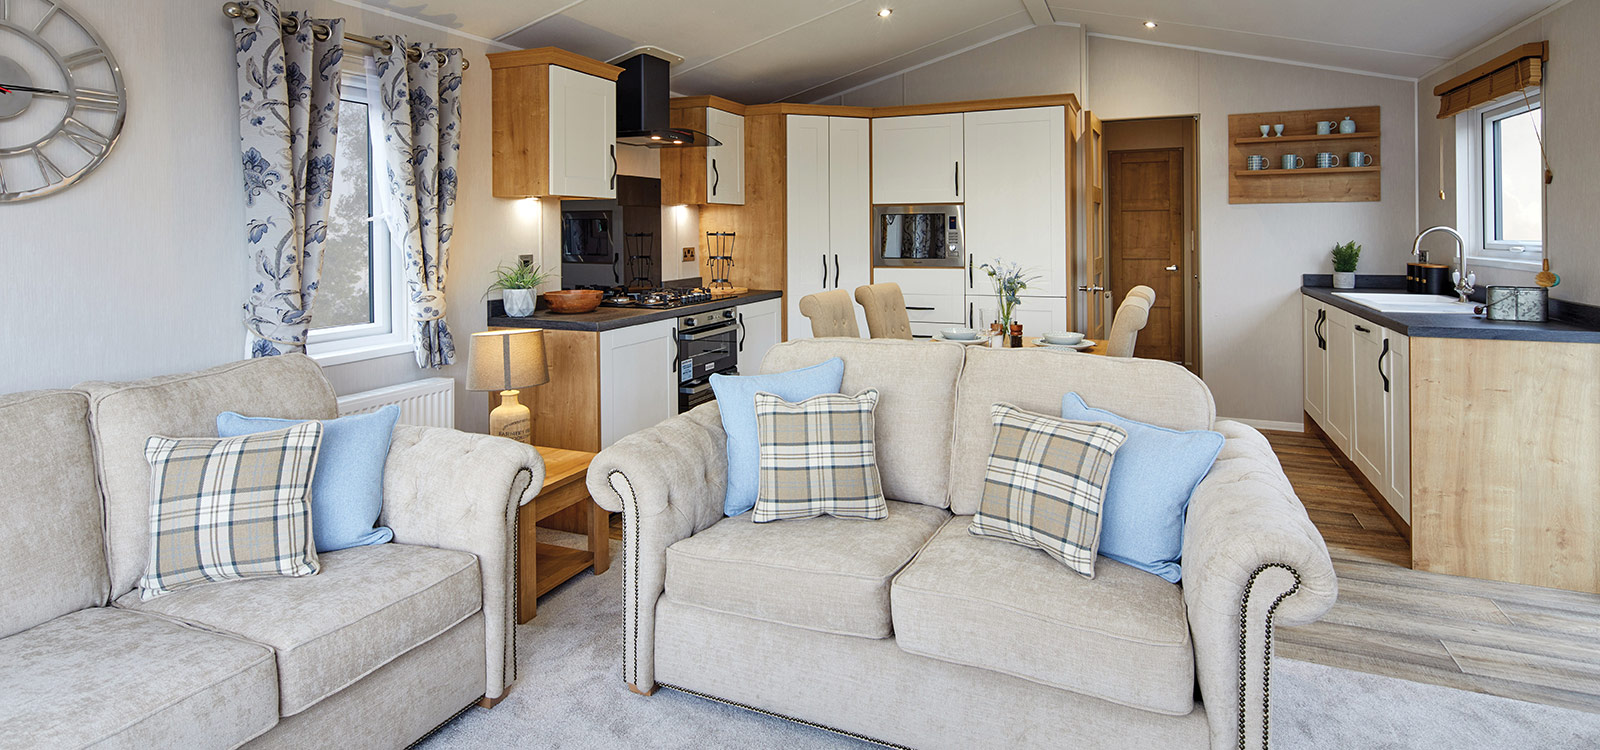 Buy a Holiday Home in Scotland